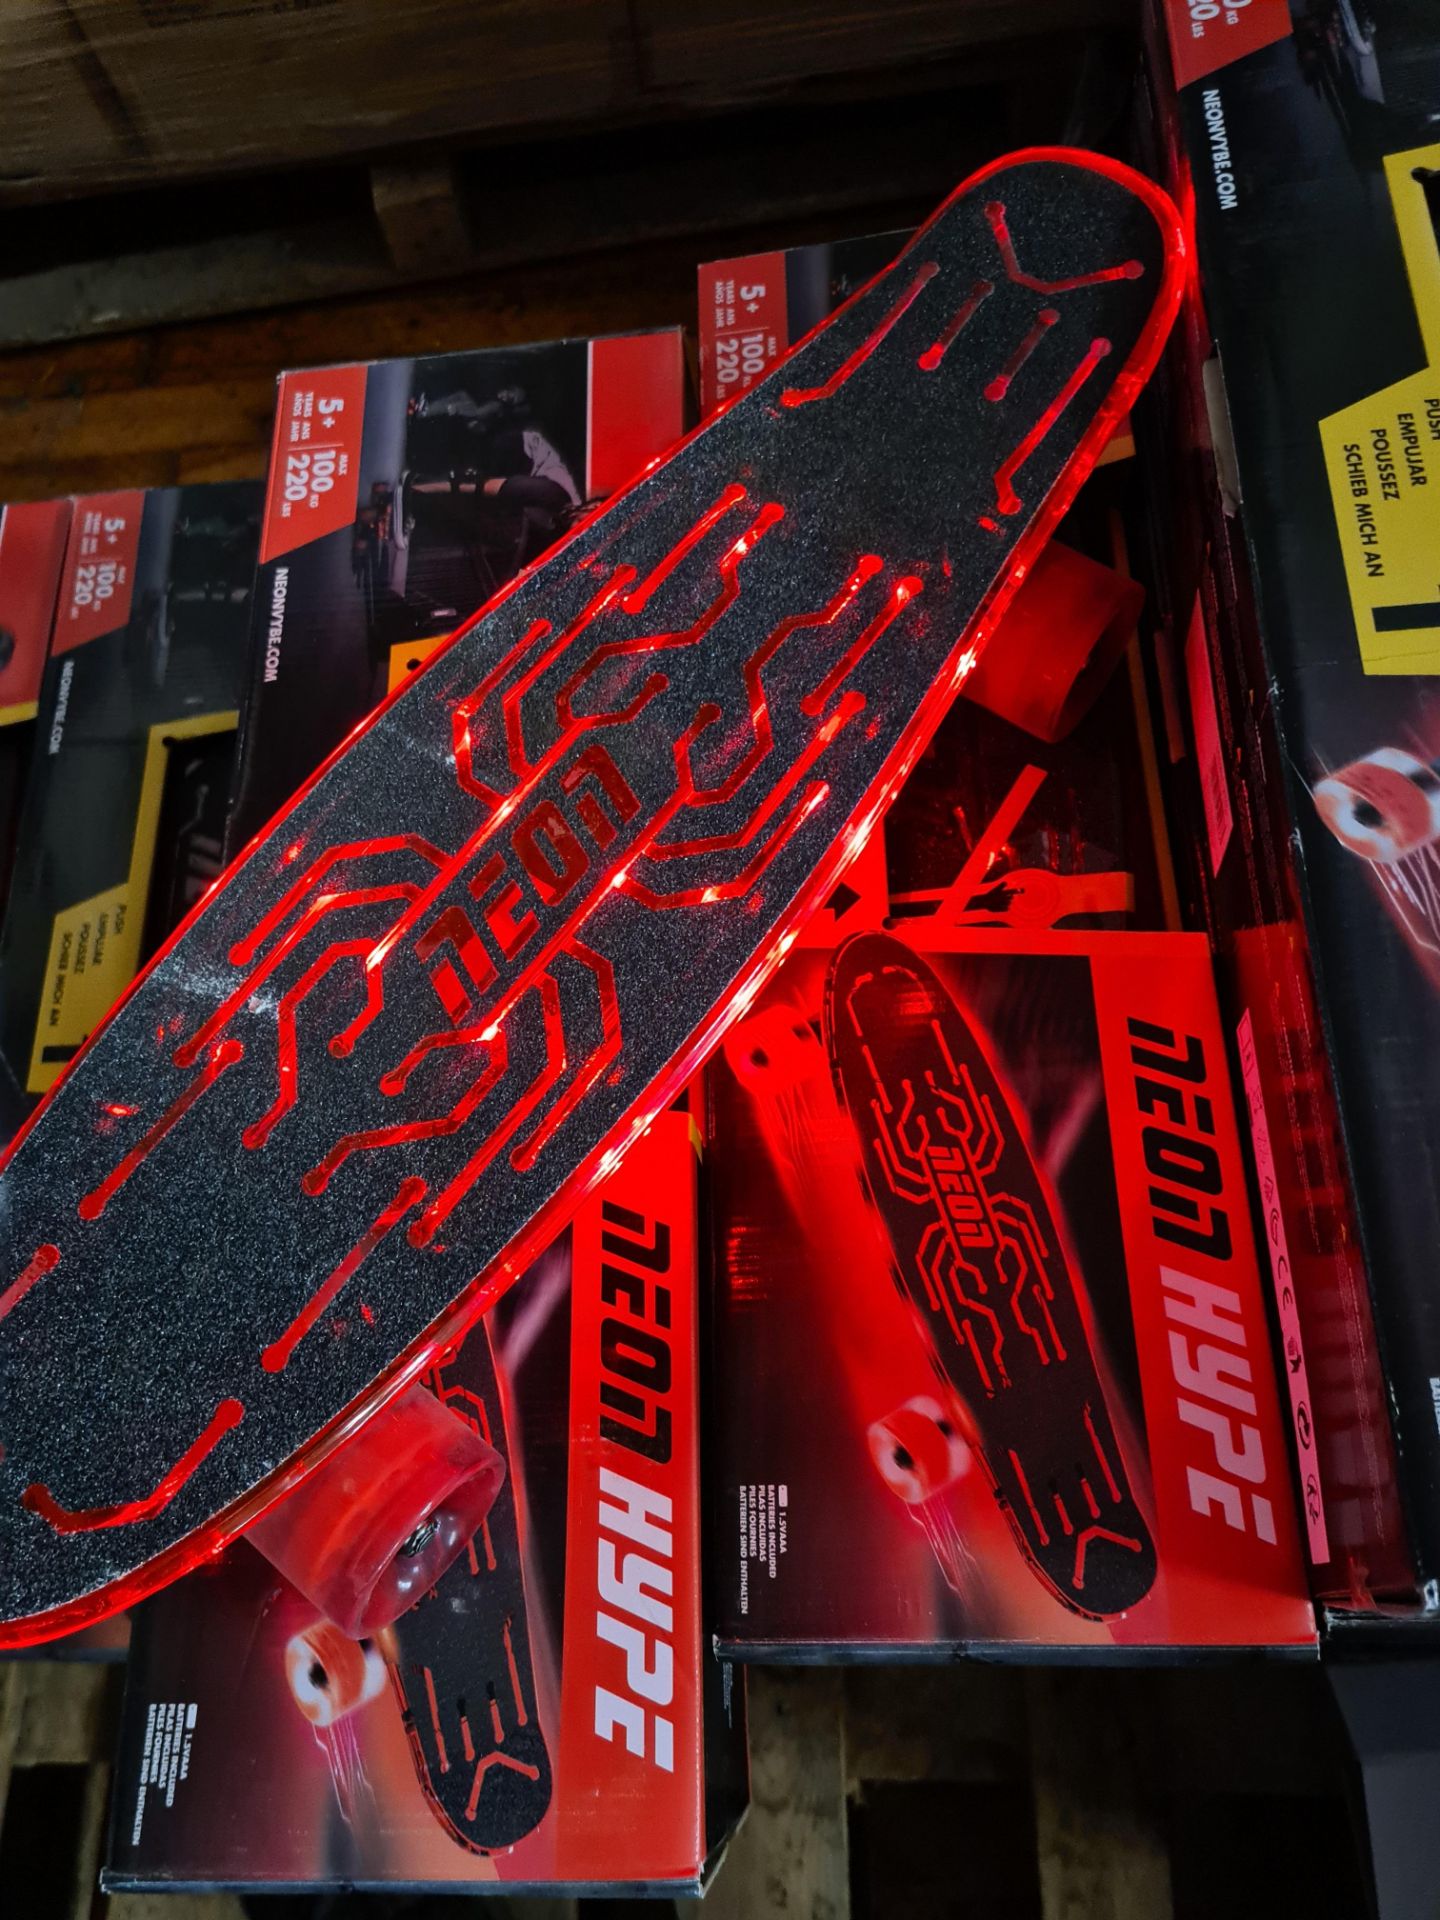 Neon Hype Skateboard with LED Light-up Function | RRP £39.99